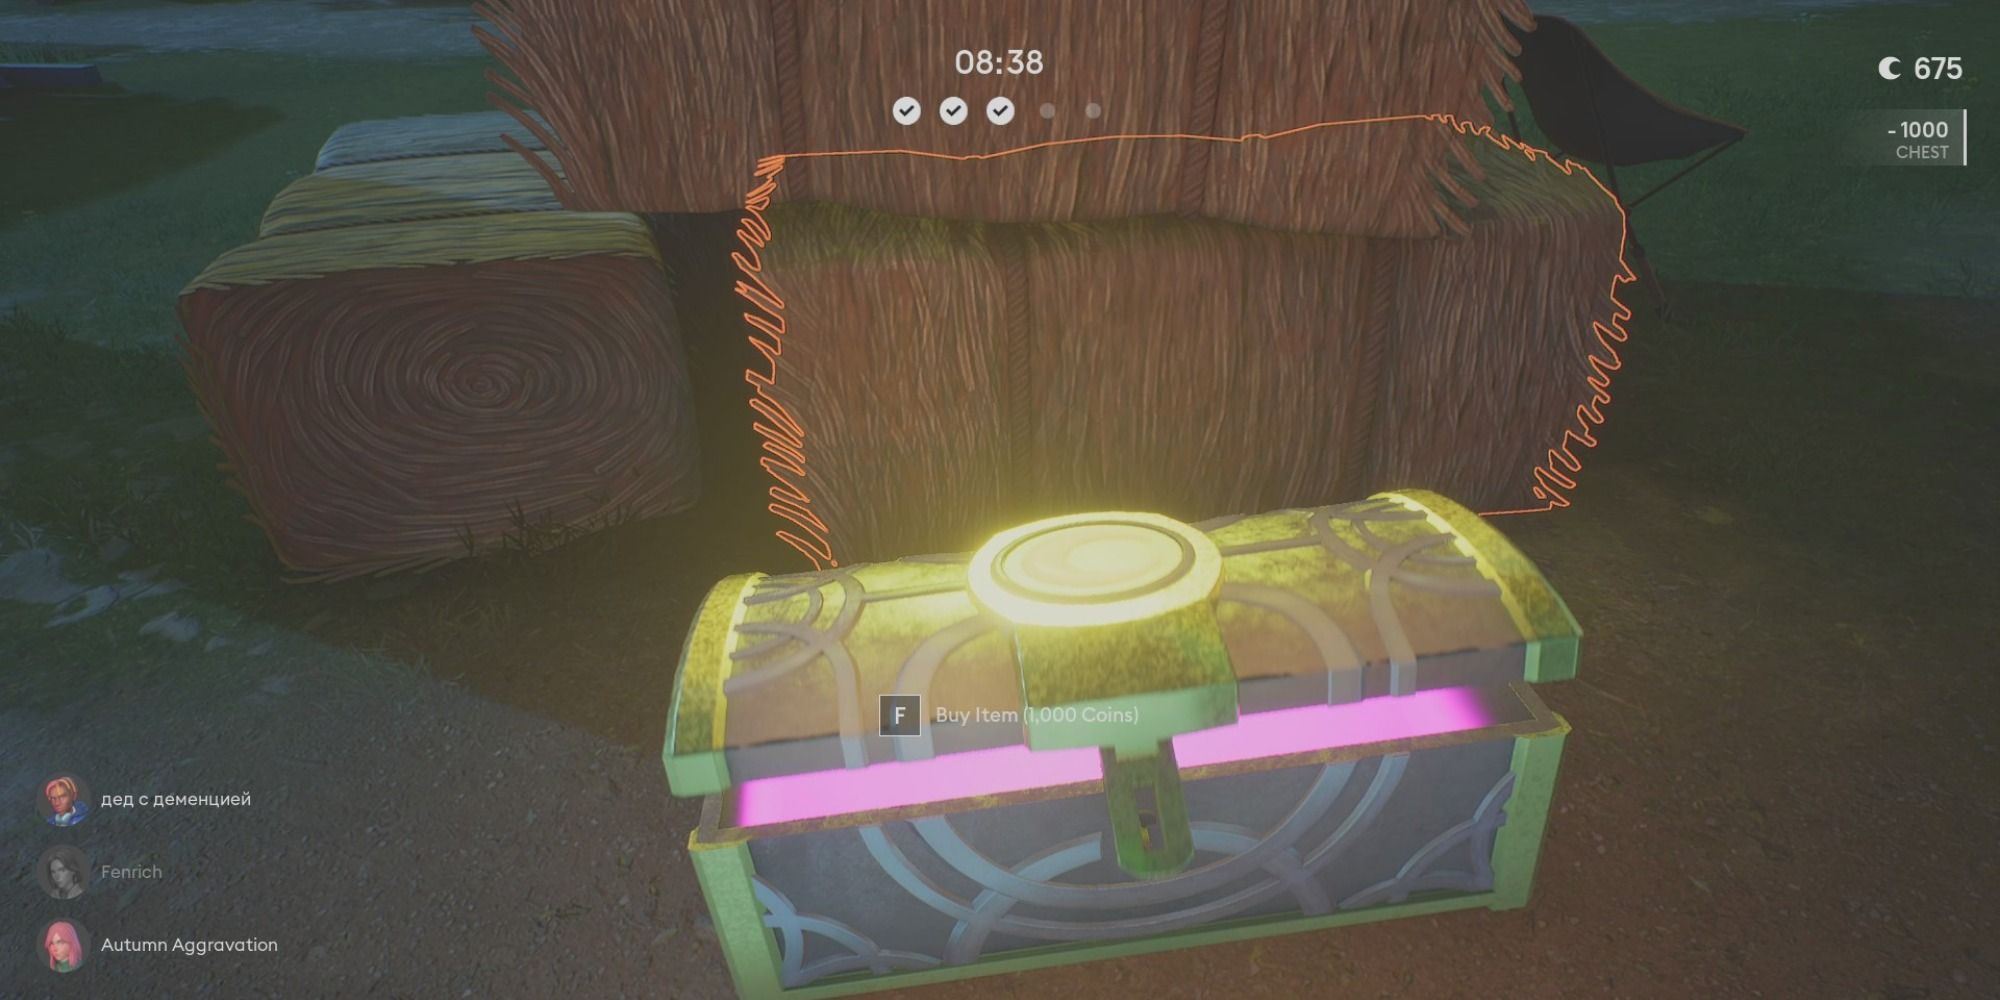 A player opens a chest next to hay bales using in-game coins